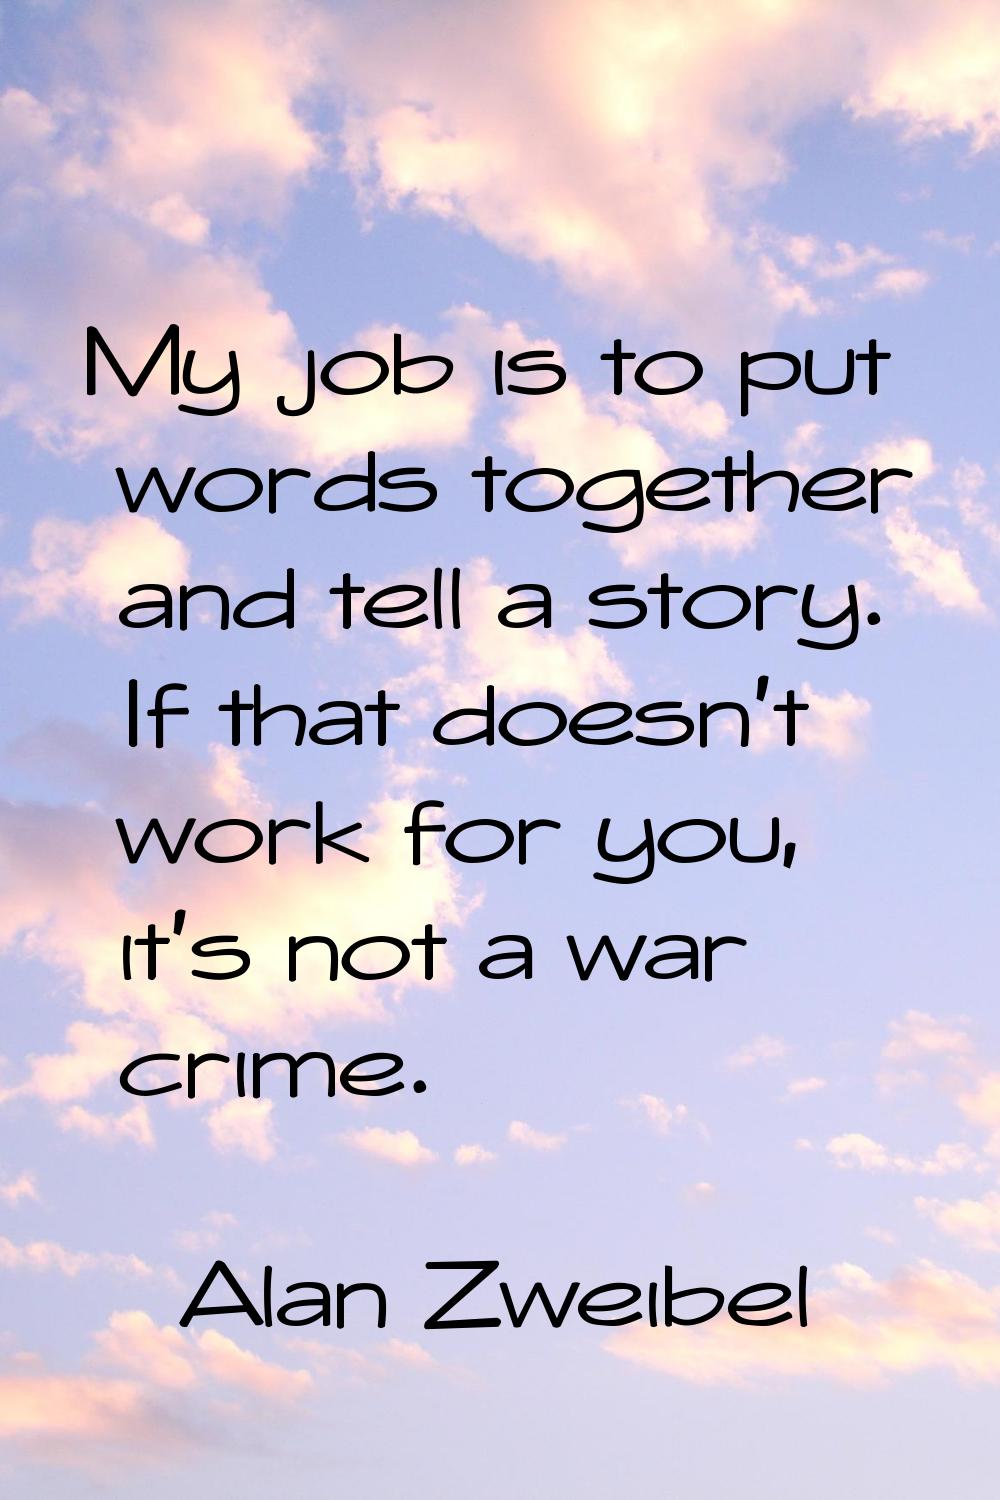 My job is to put words together and tell a story. If that doesn't work for you, it's not a war crim